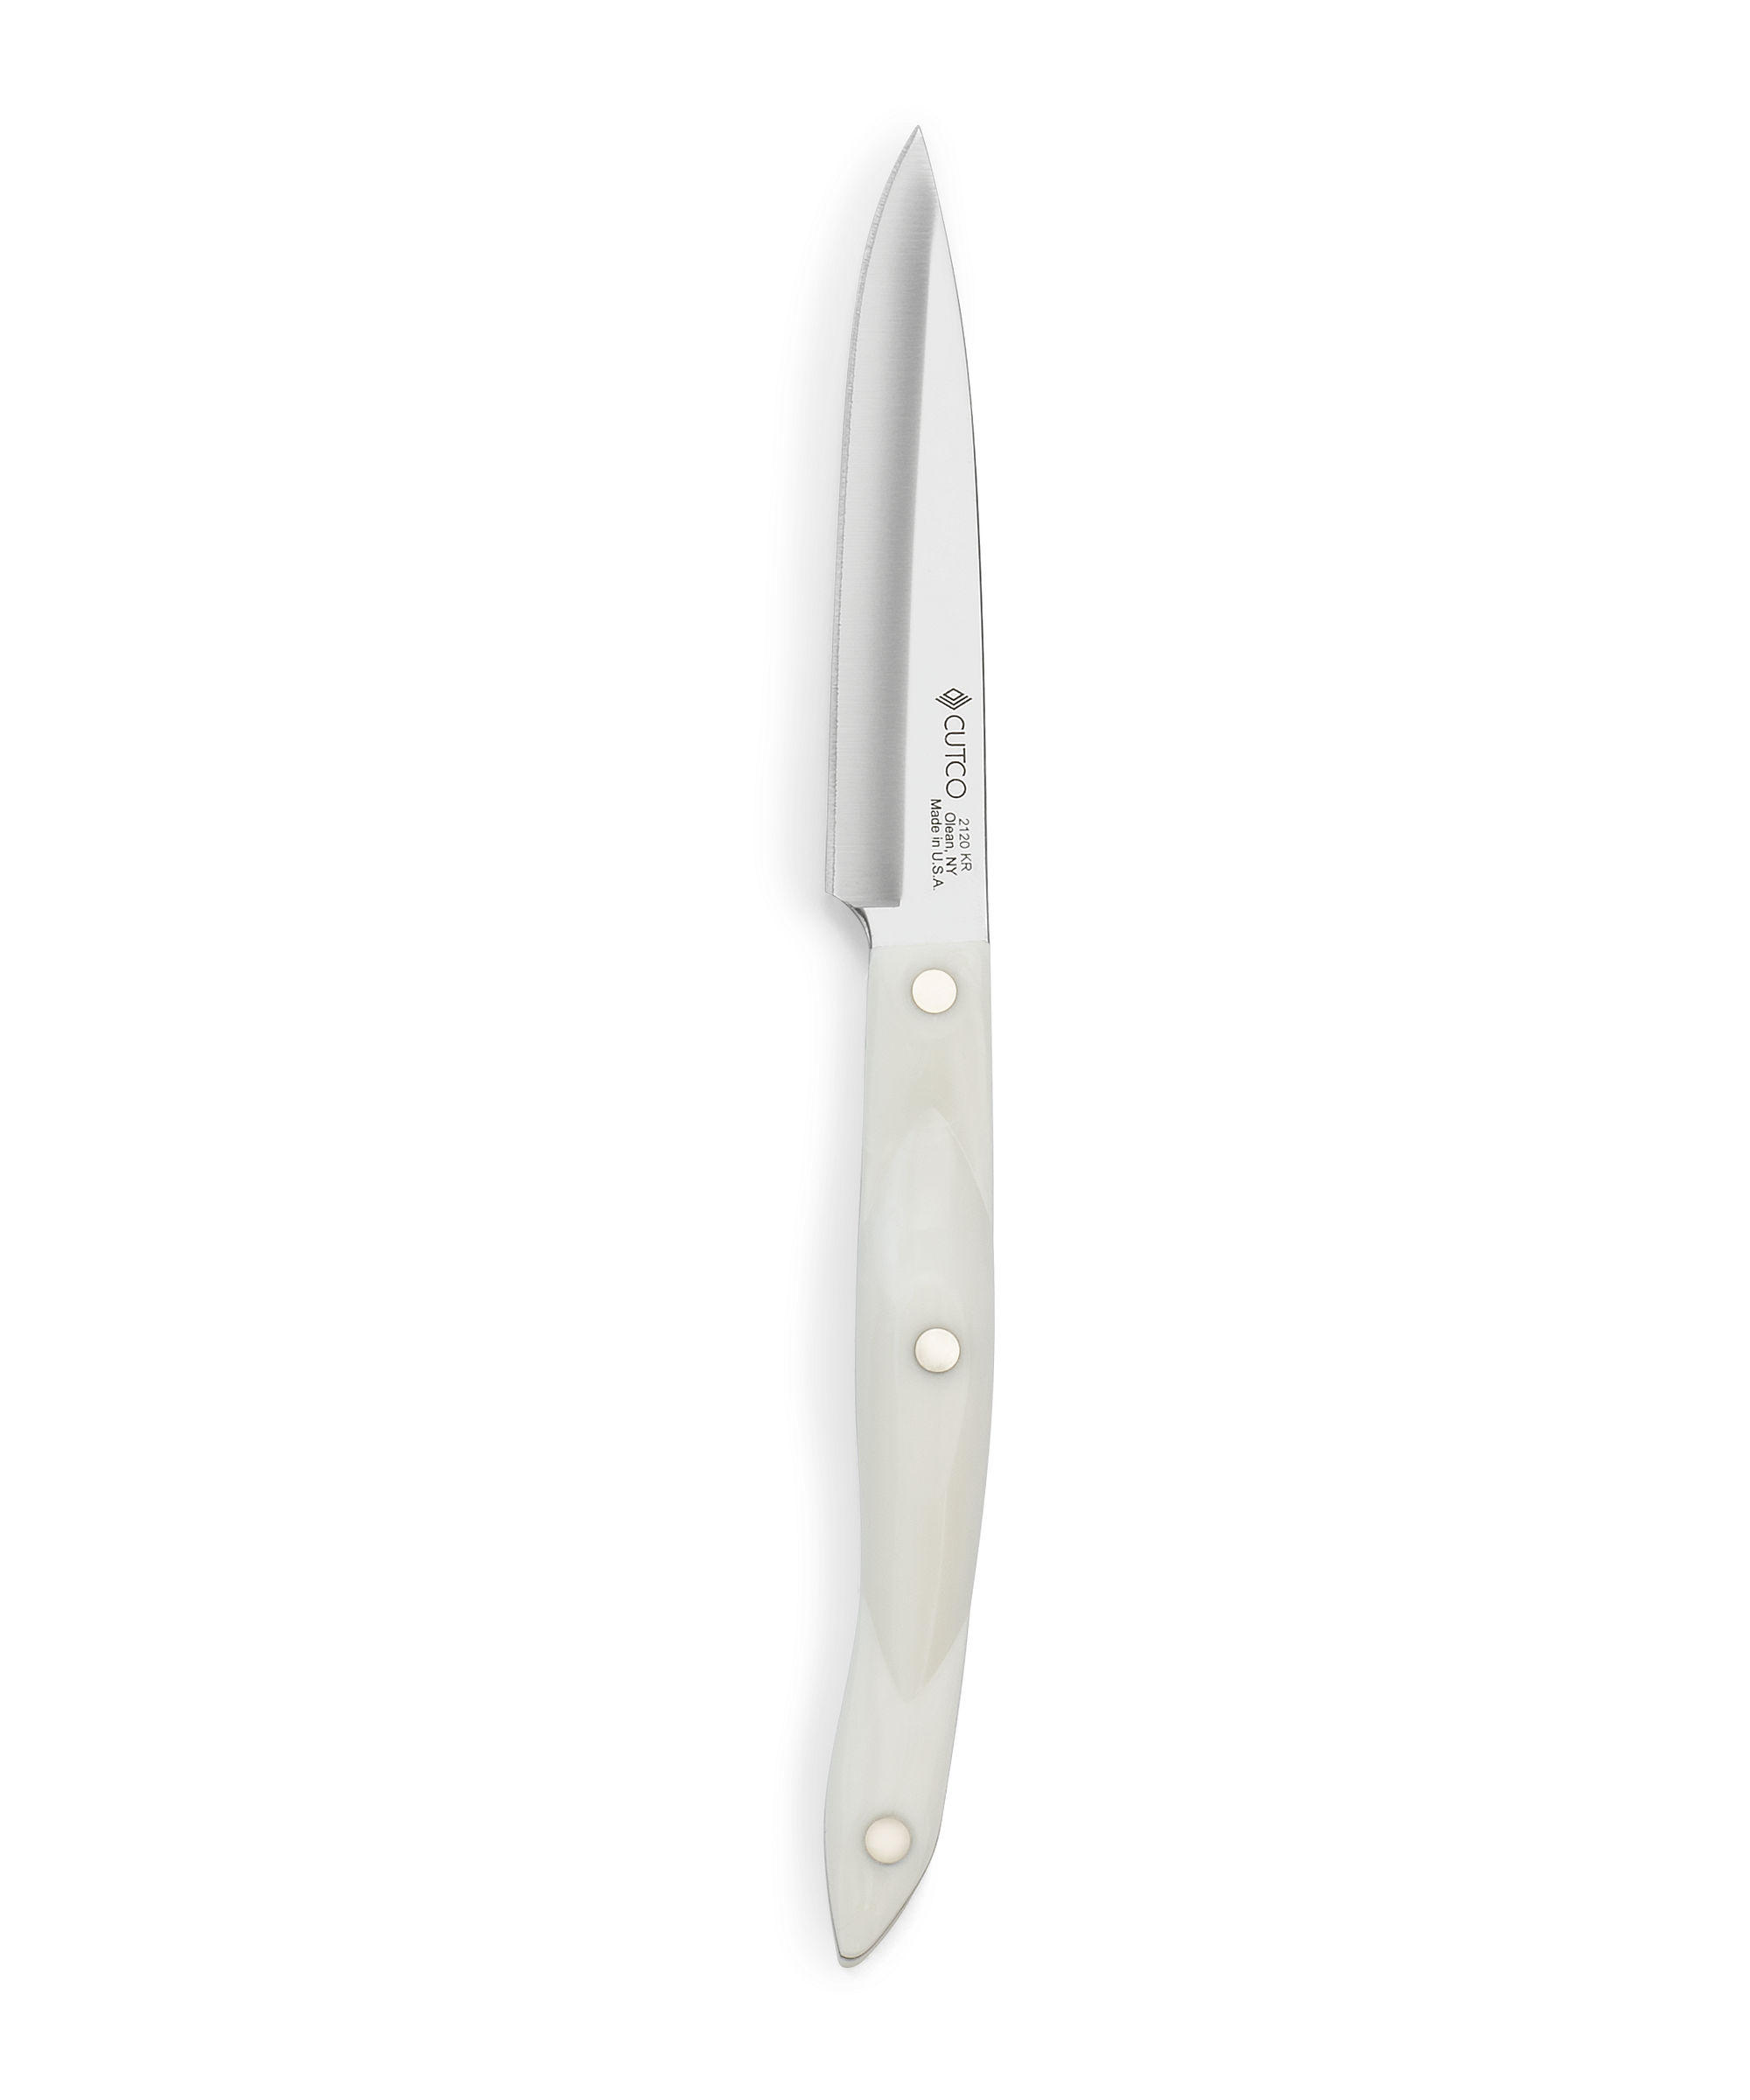 Slicex Premium Paring Knife for Kitchen - Sharp 4 Inch Fruit Knife for  Precise Cutting - Small Pairing Knife Ideal for Peeling and Slicing -  Essential